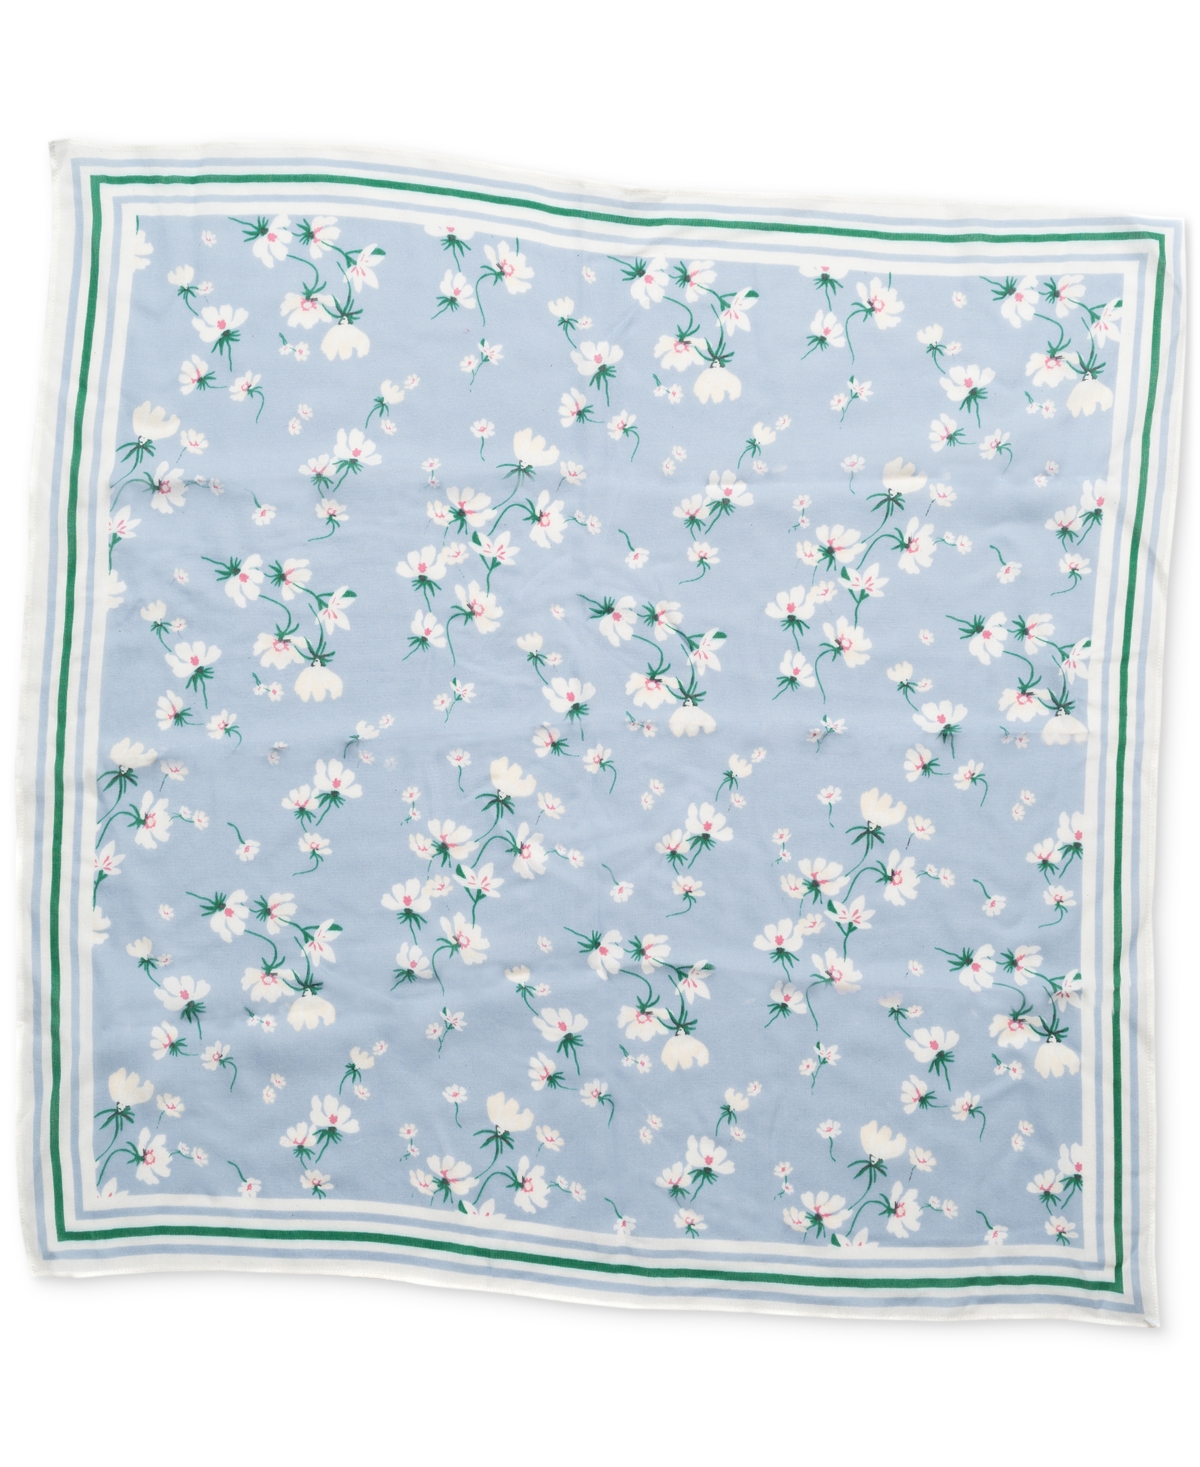 Women's Cheerful Floral Square Scarf, Created for Macy's - White Multi